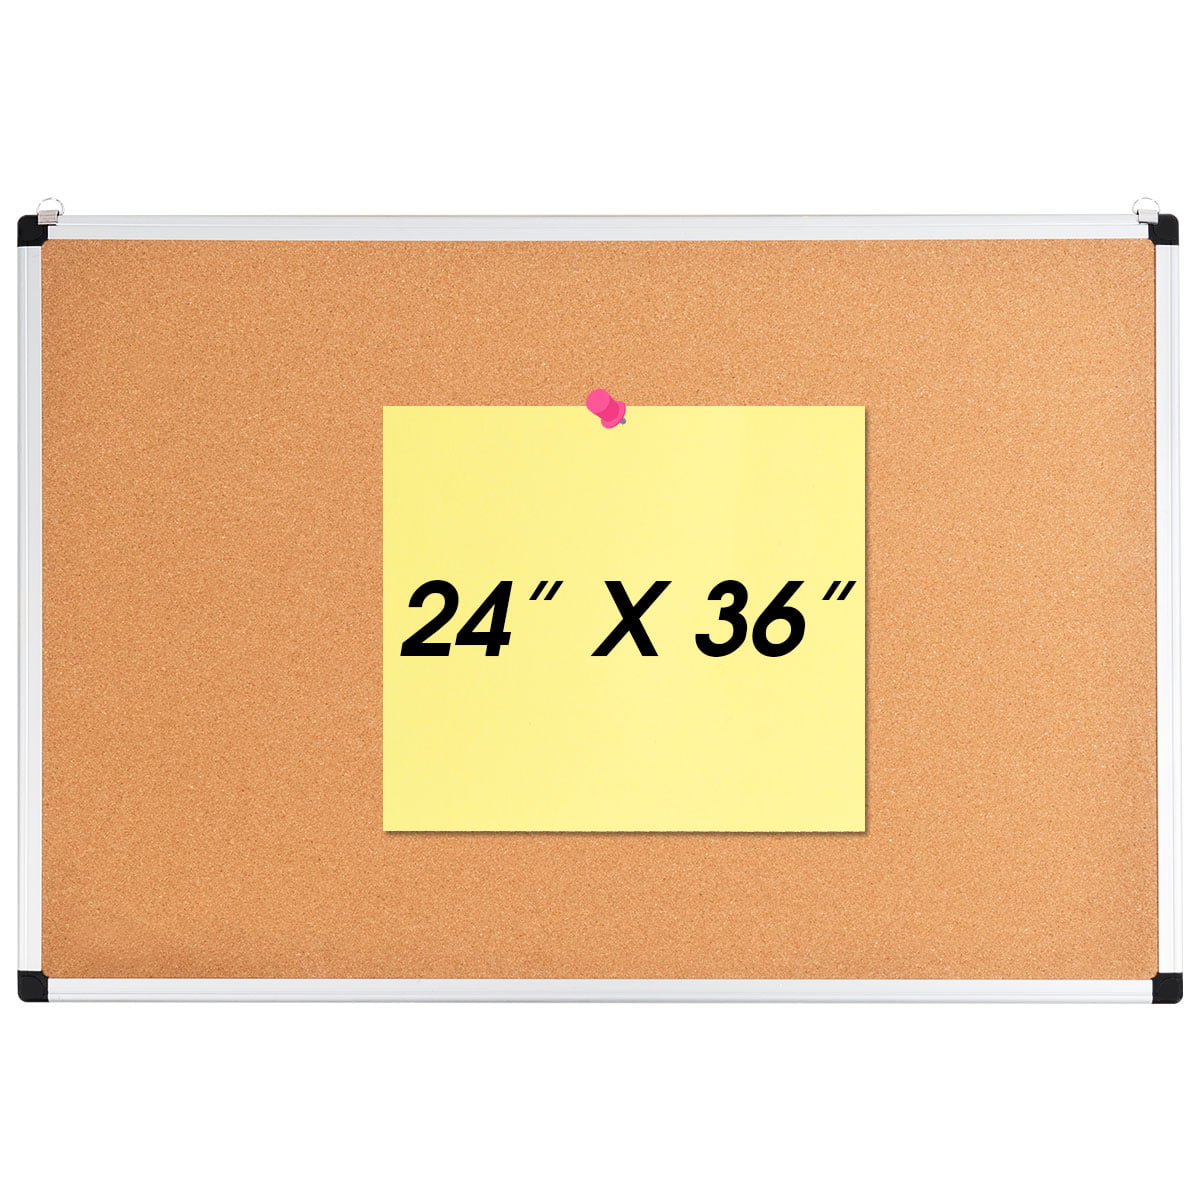 DexBoard Cork Board Bulletin Board for Wall Home Decor Black Frame Perfect for Display and Organize in Office 24x36 Wall Mounted Decorative Hanging Pin Board School 